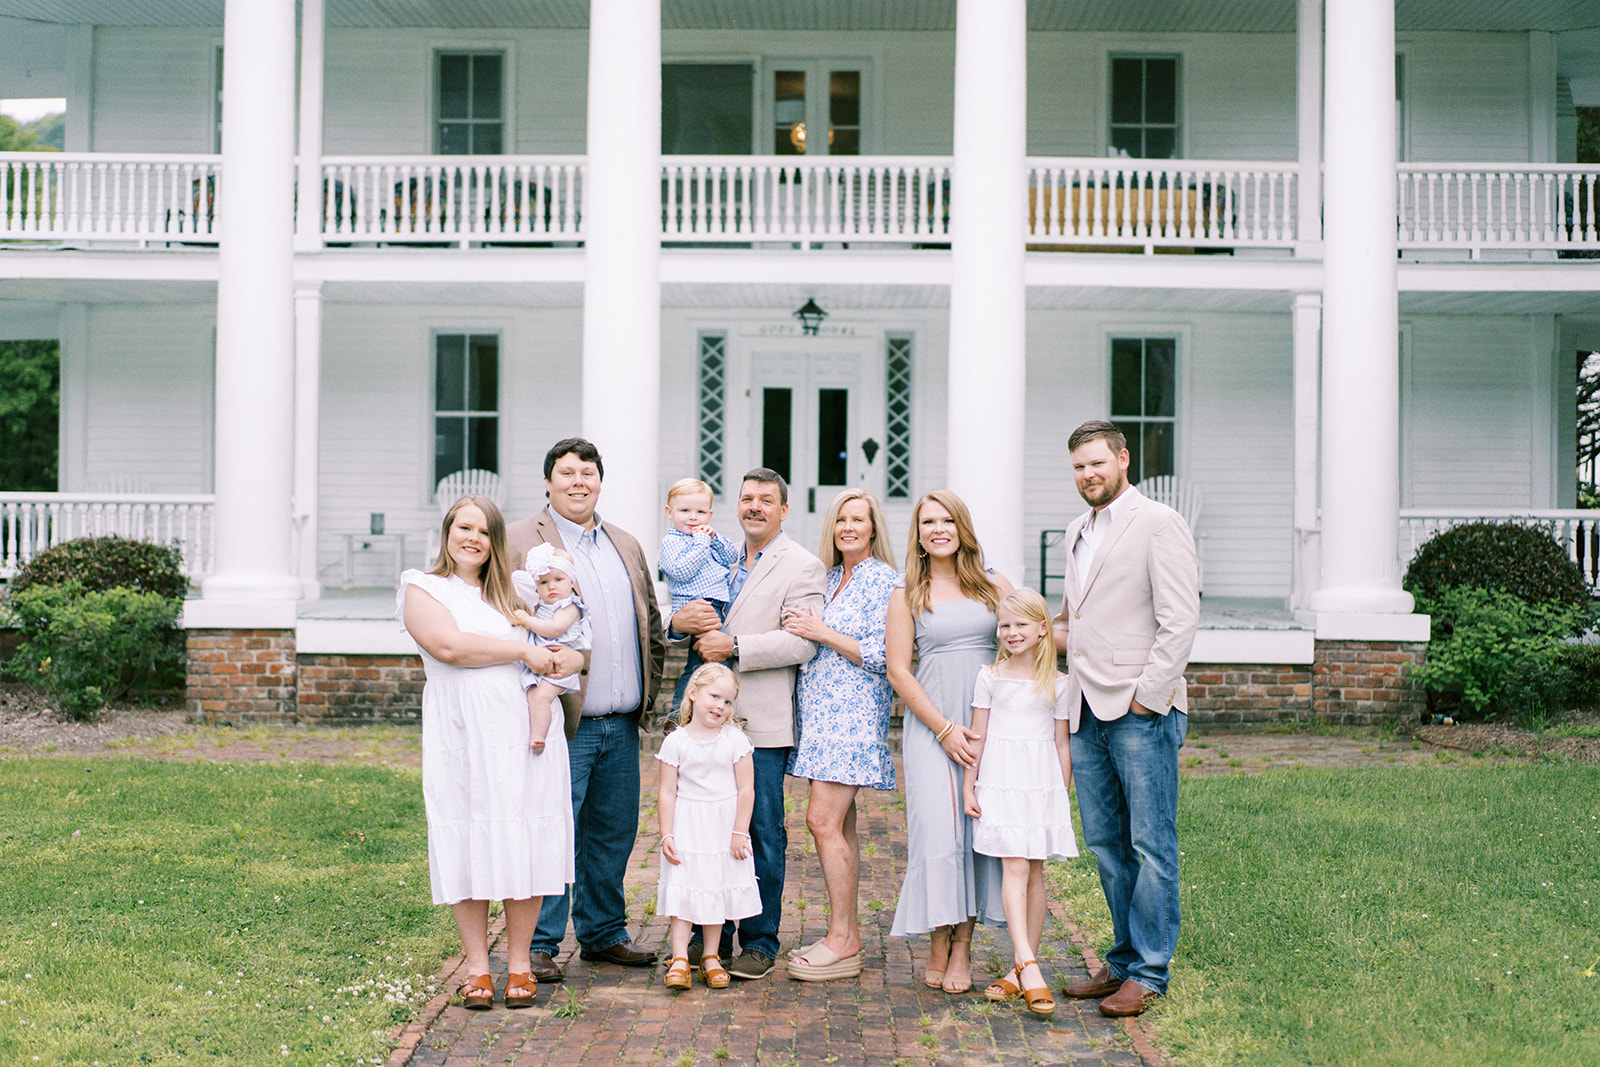 A large family poses in front of the Winston Place in Valley Head, Alabama for a photograph